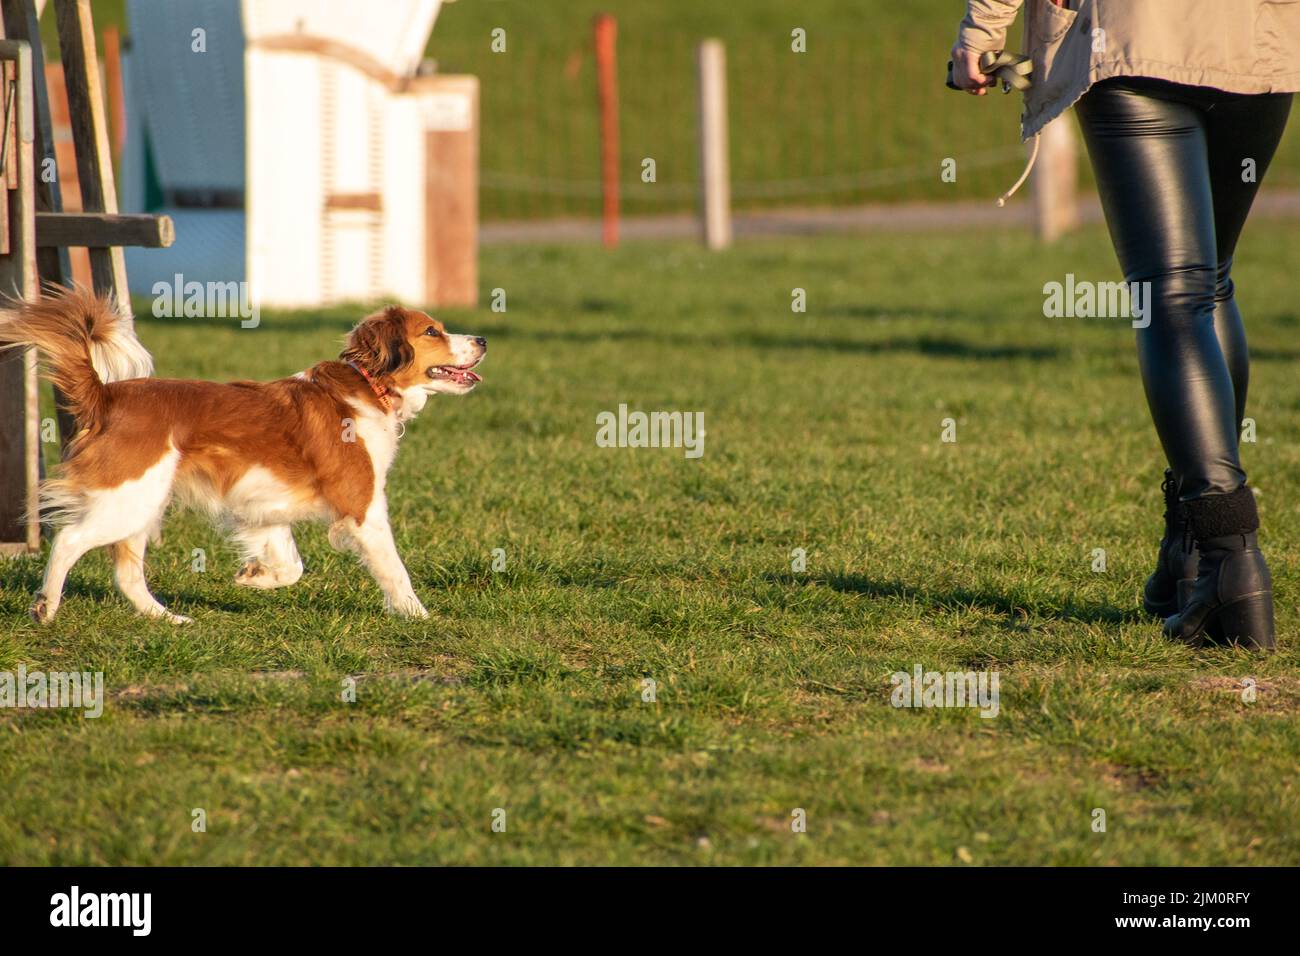 A bright summer day in a park with a Dutch Kooikerhondje puppy standing next to its owner in a field Stock Photo